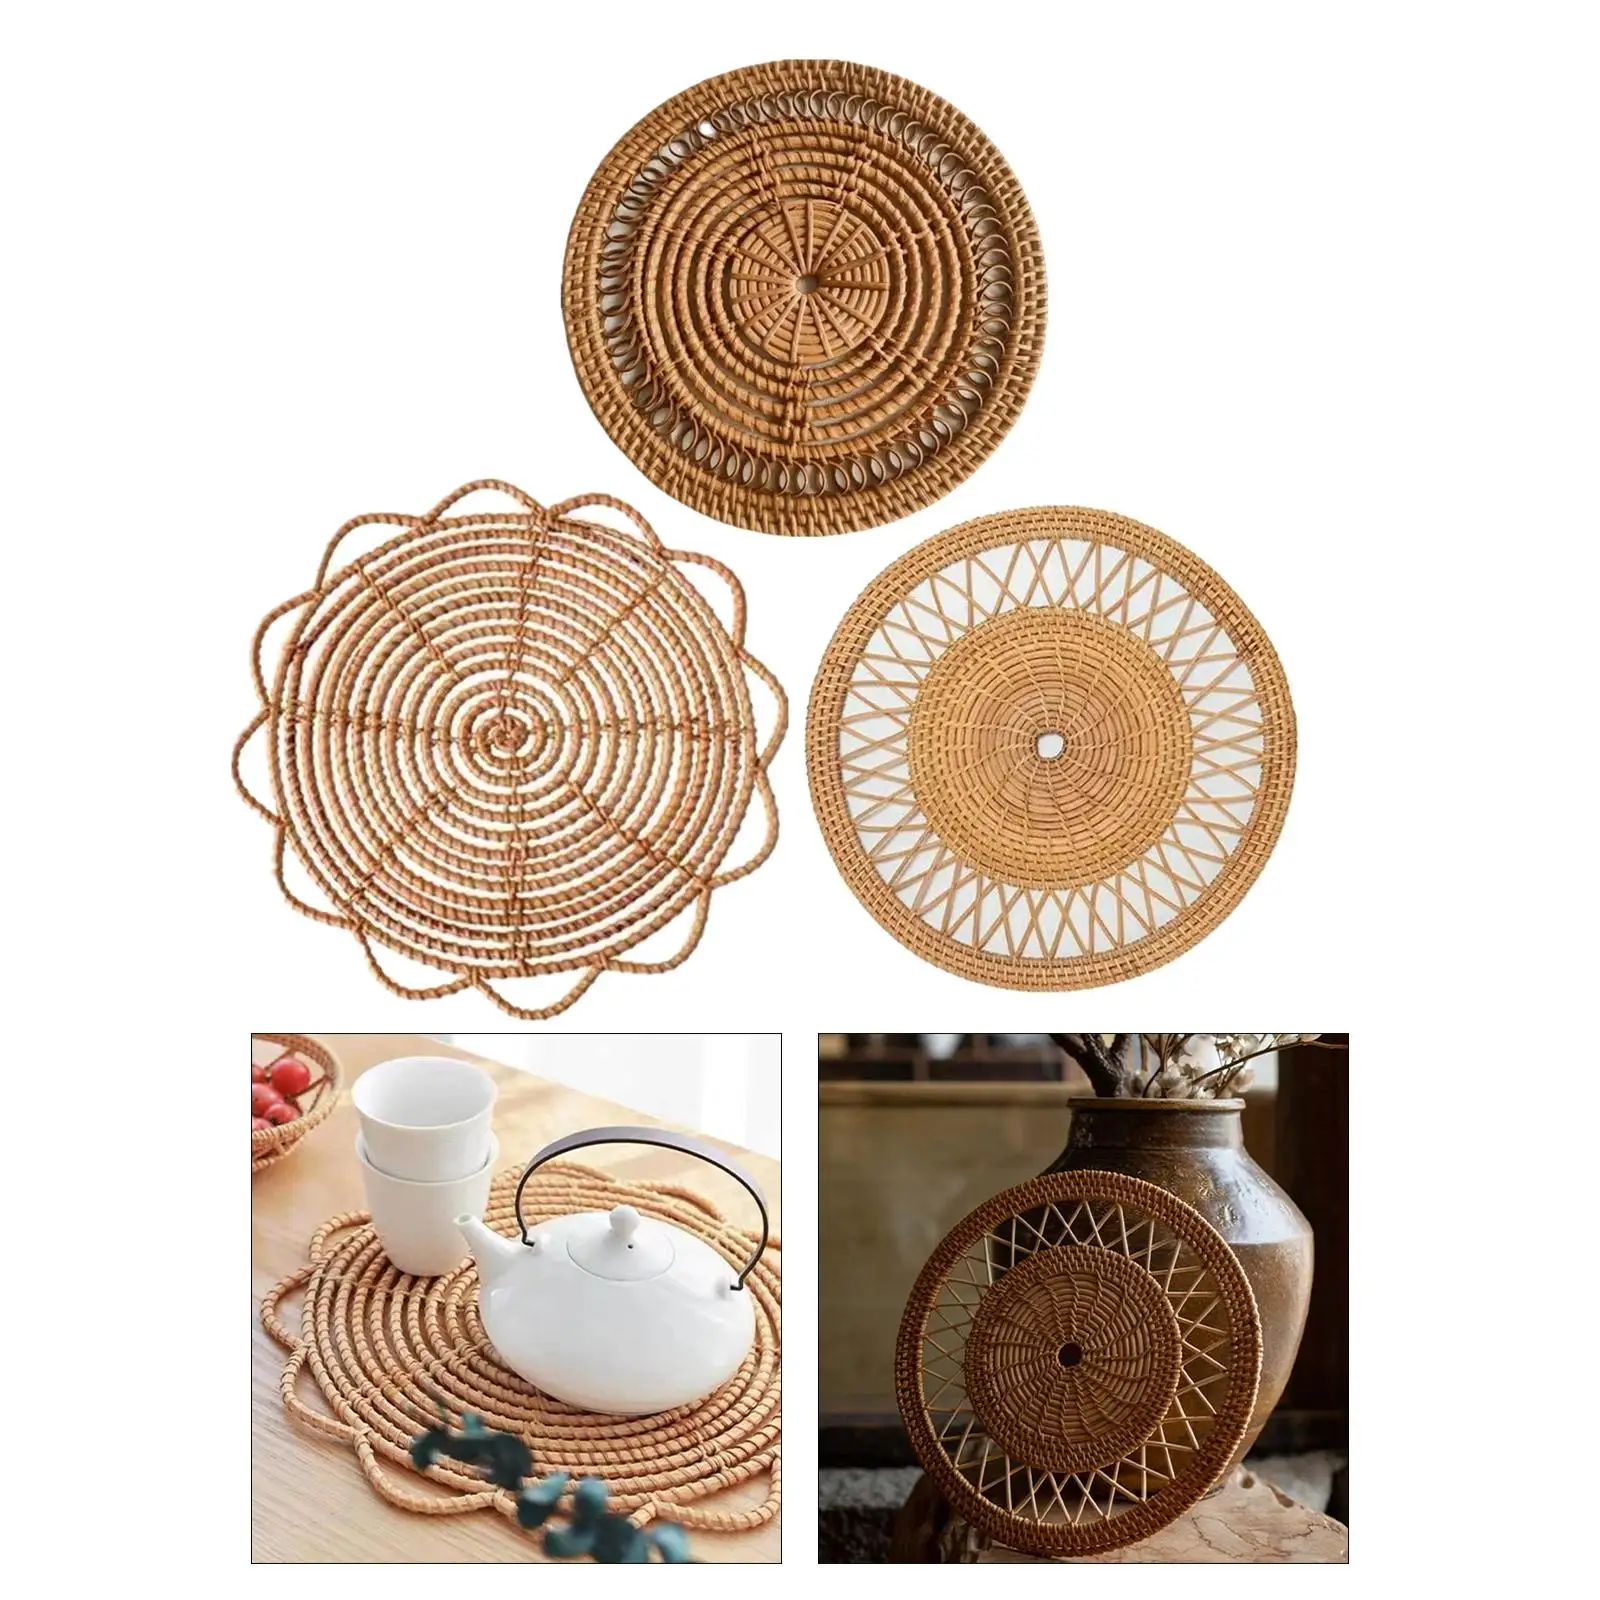 Rattan Wall Basket Decor Unique Wall Hanging Hand Woven for Home and Office